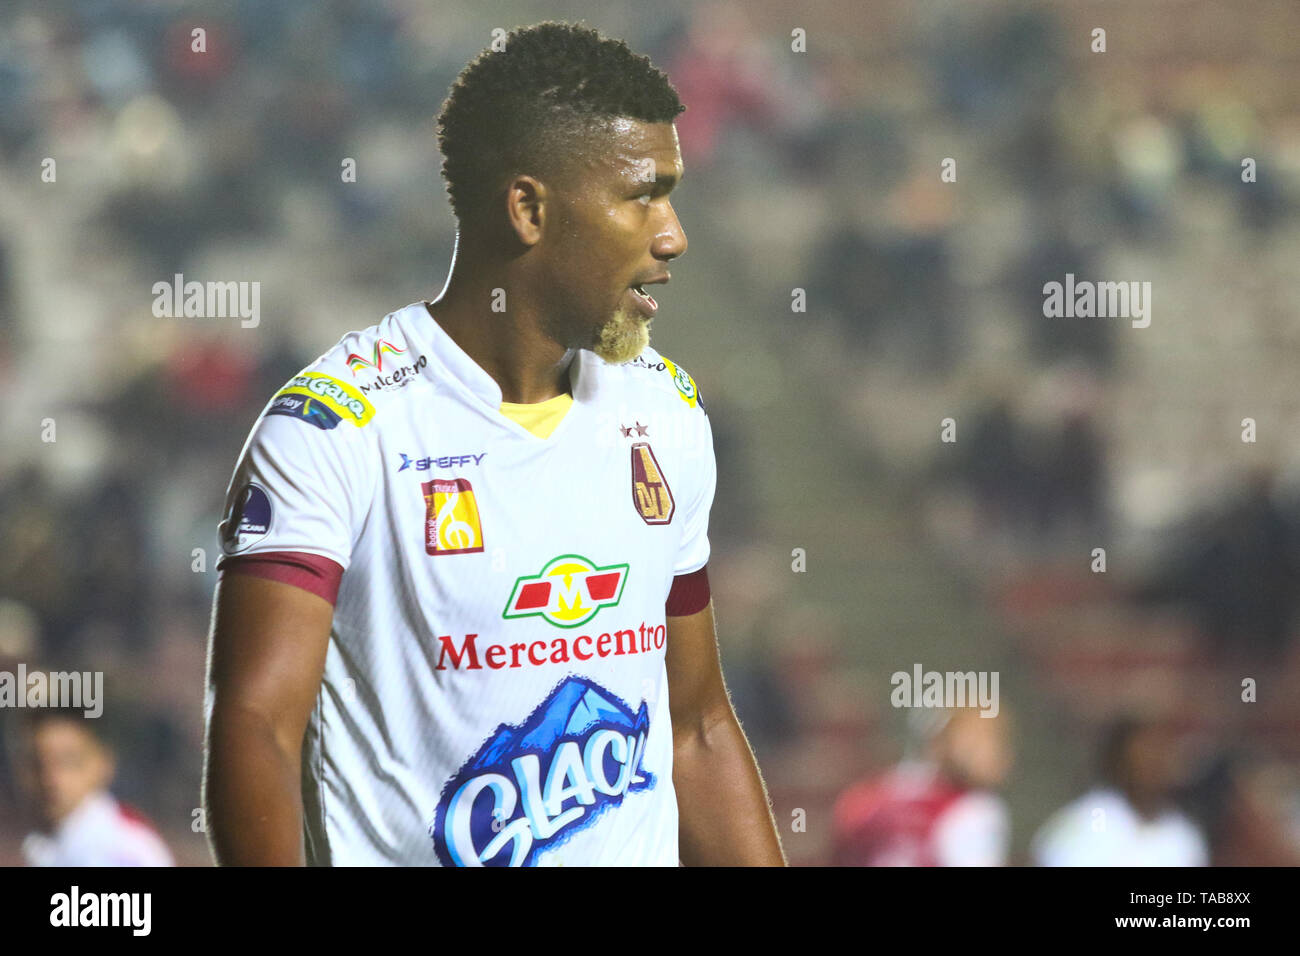 BUENOS AIRES, 23.05.2019: Danovis Banguero during the match between Argentinos Juniors and Deportes Tolima for the 2nd round of Conmebol Sudamericana  Stock Photo